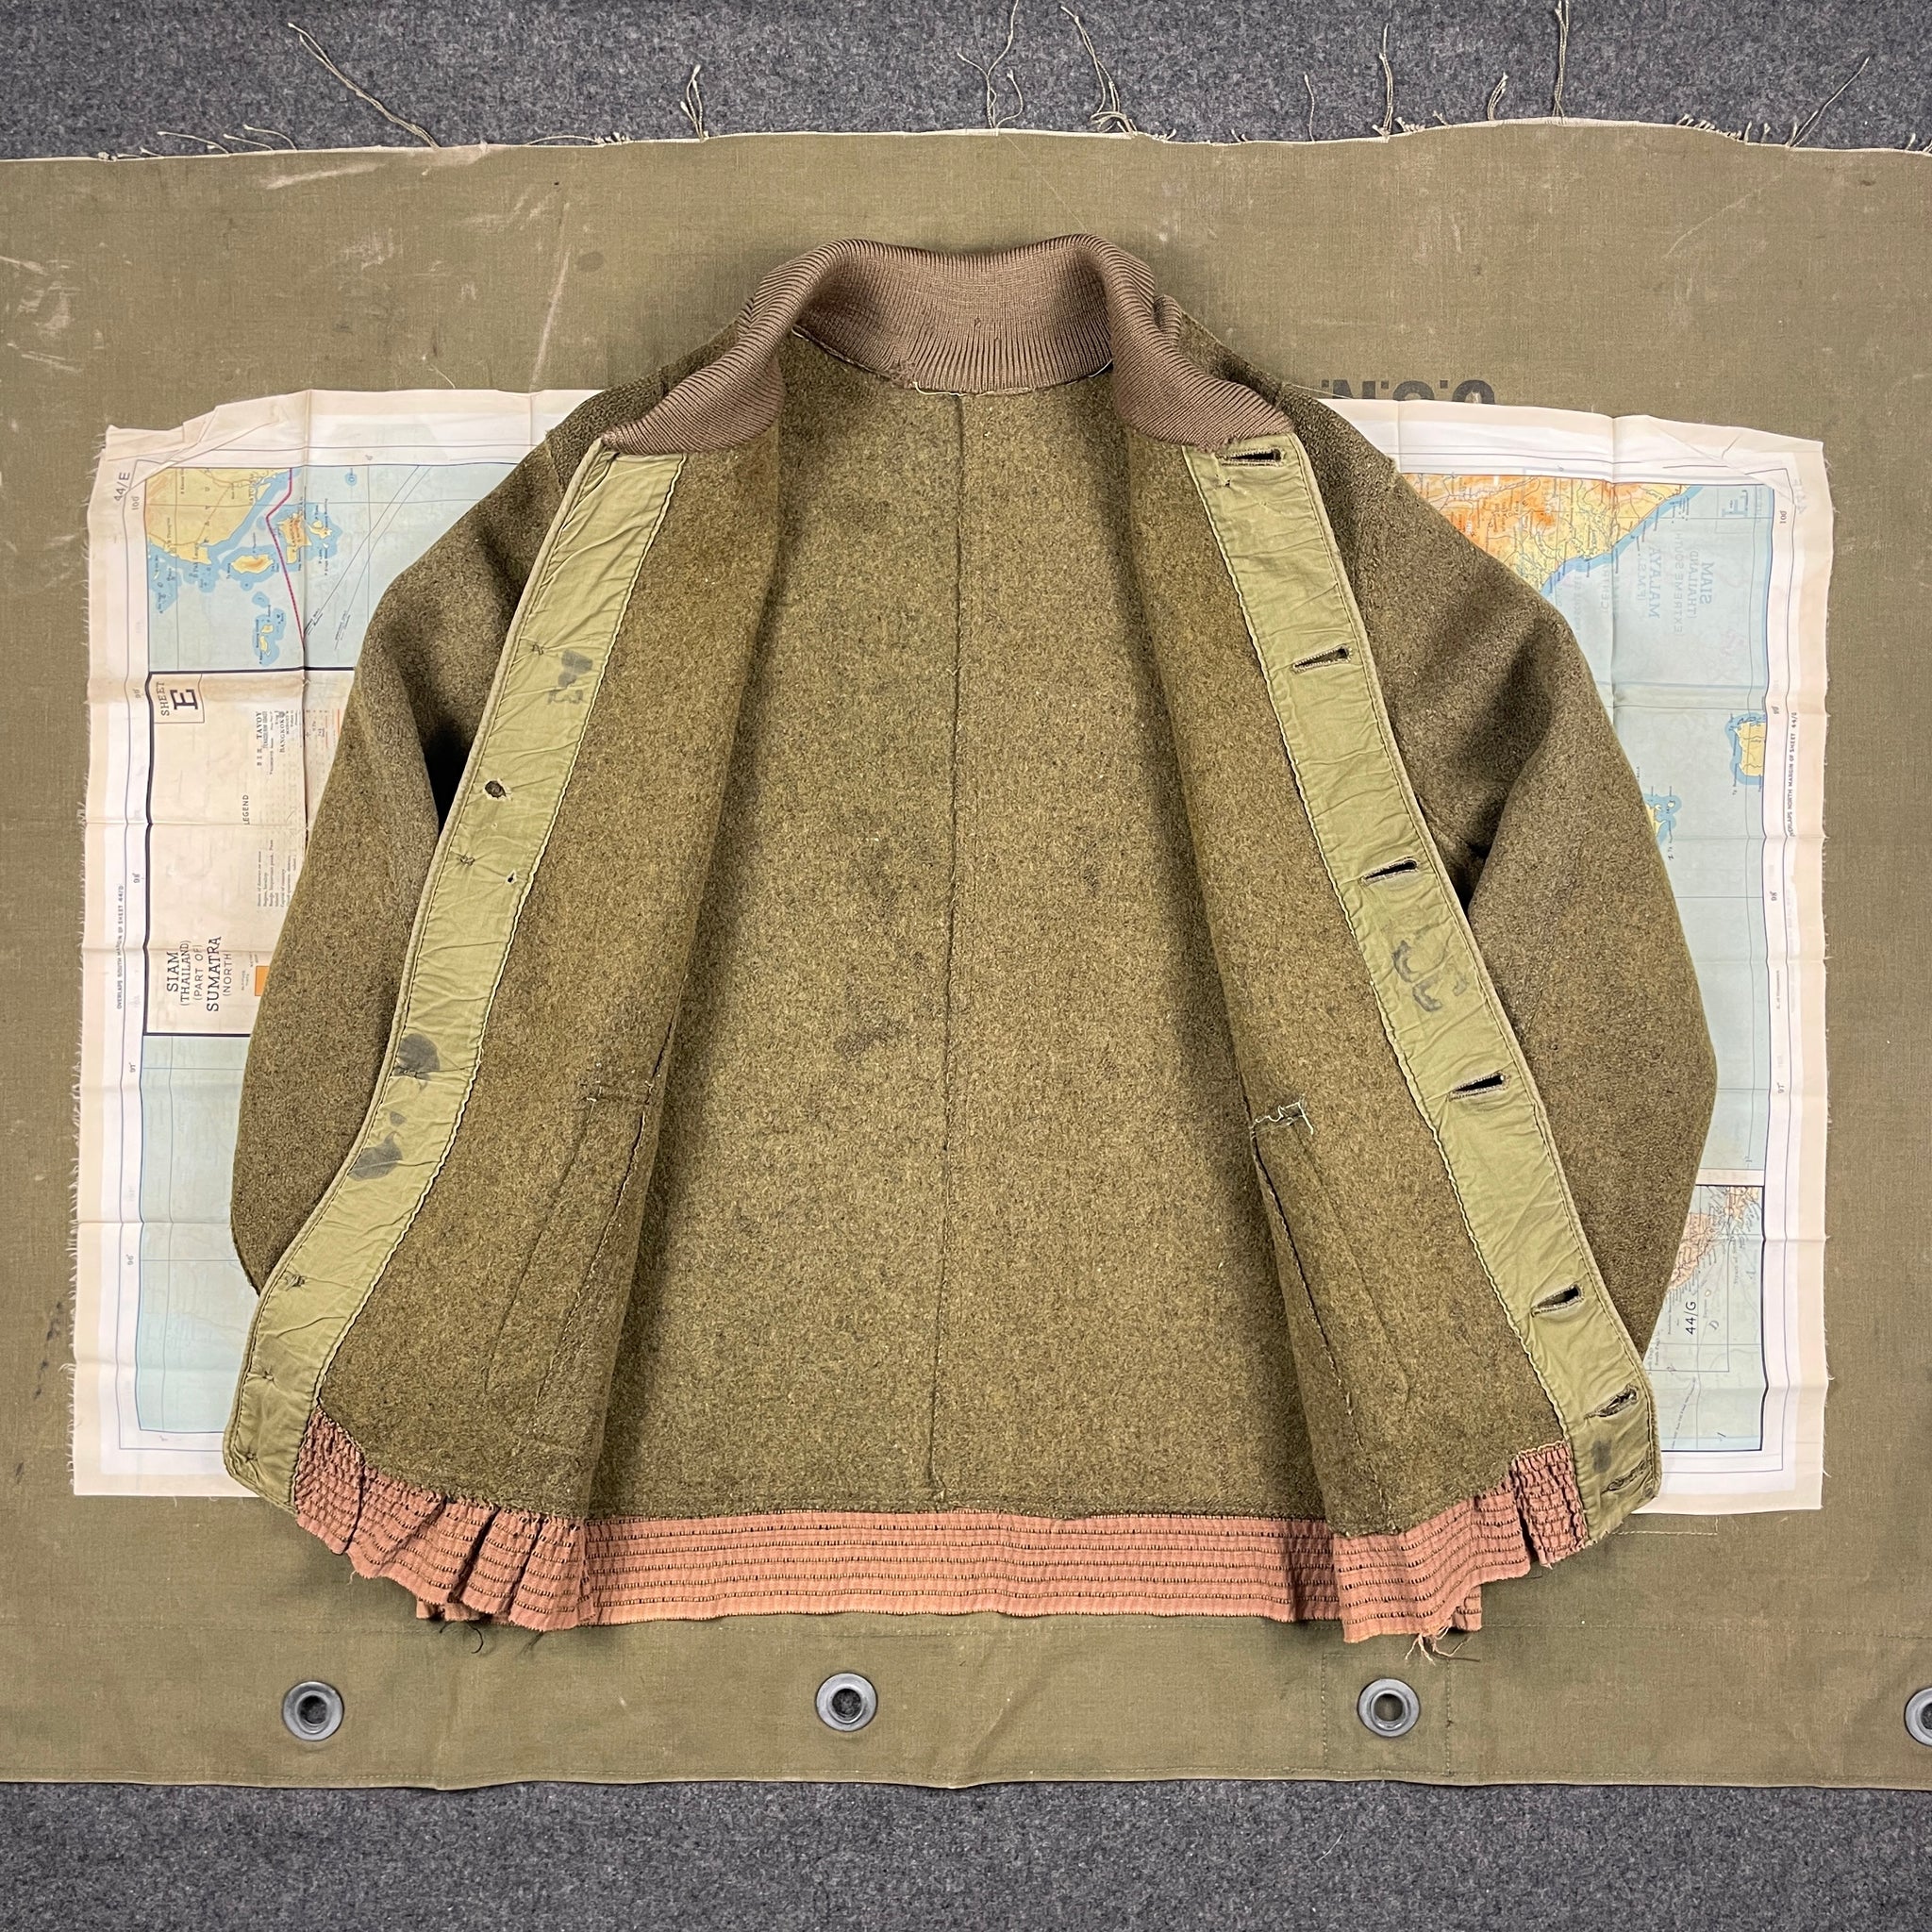 Civilian Conservation Corps 1930s A1 Wool Work Jacket – The 